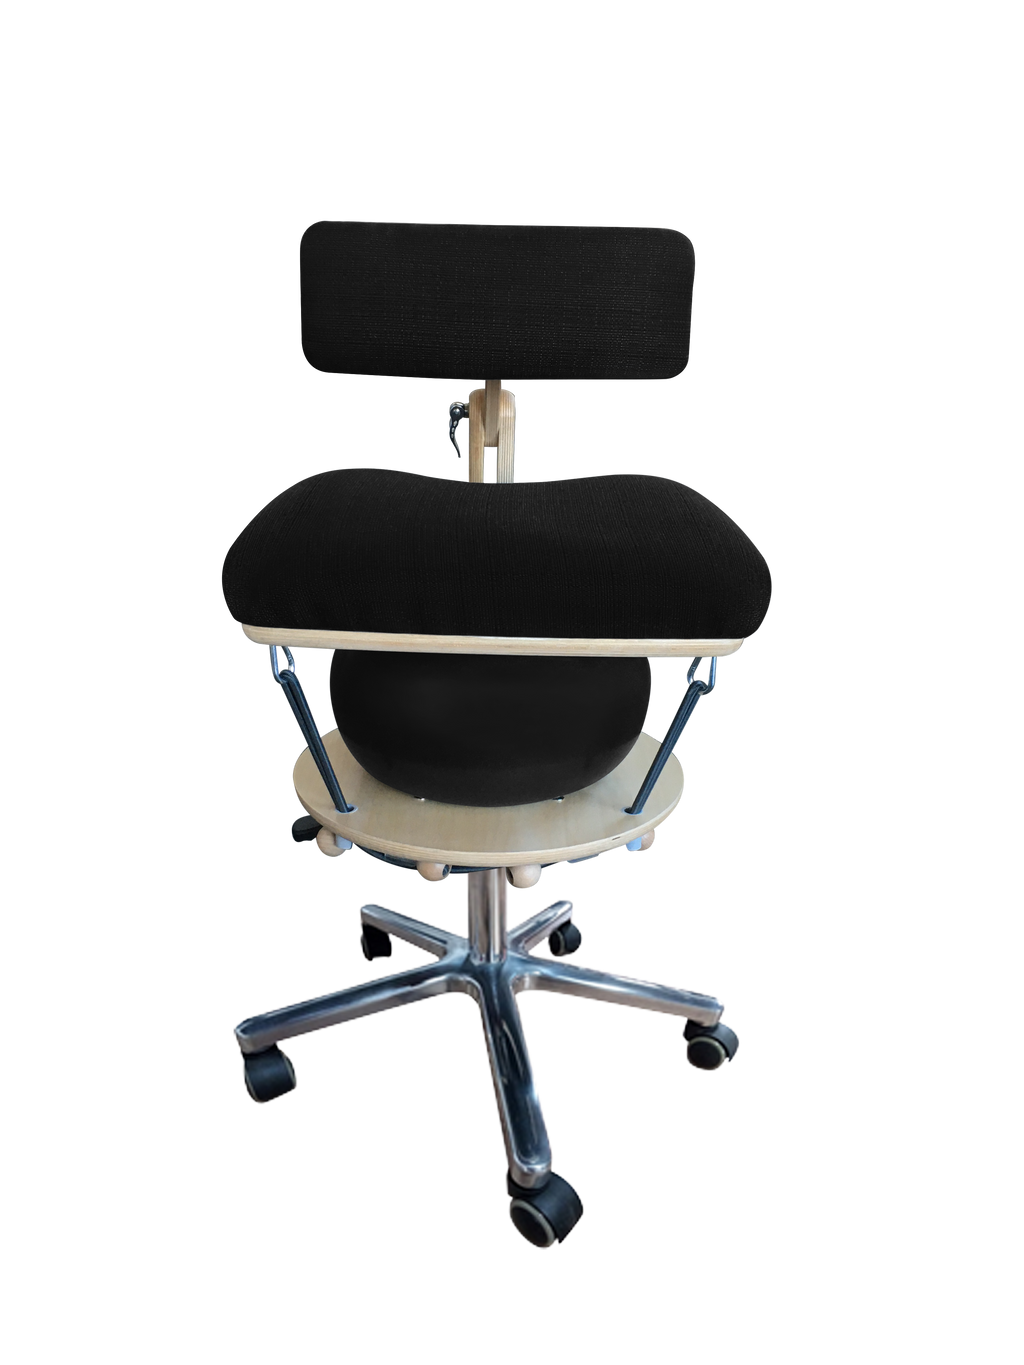 SPECIAL DEAL!  Språng Chair 2.0 - Deluxe Edition BLACK STRETCH YOGA NO BALL COVER